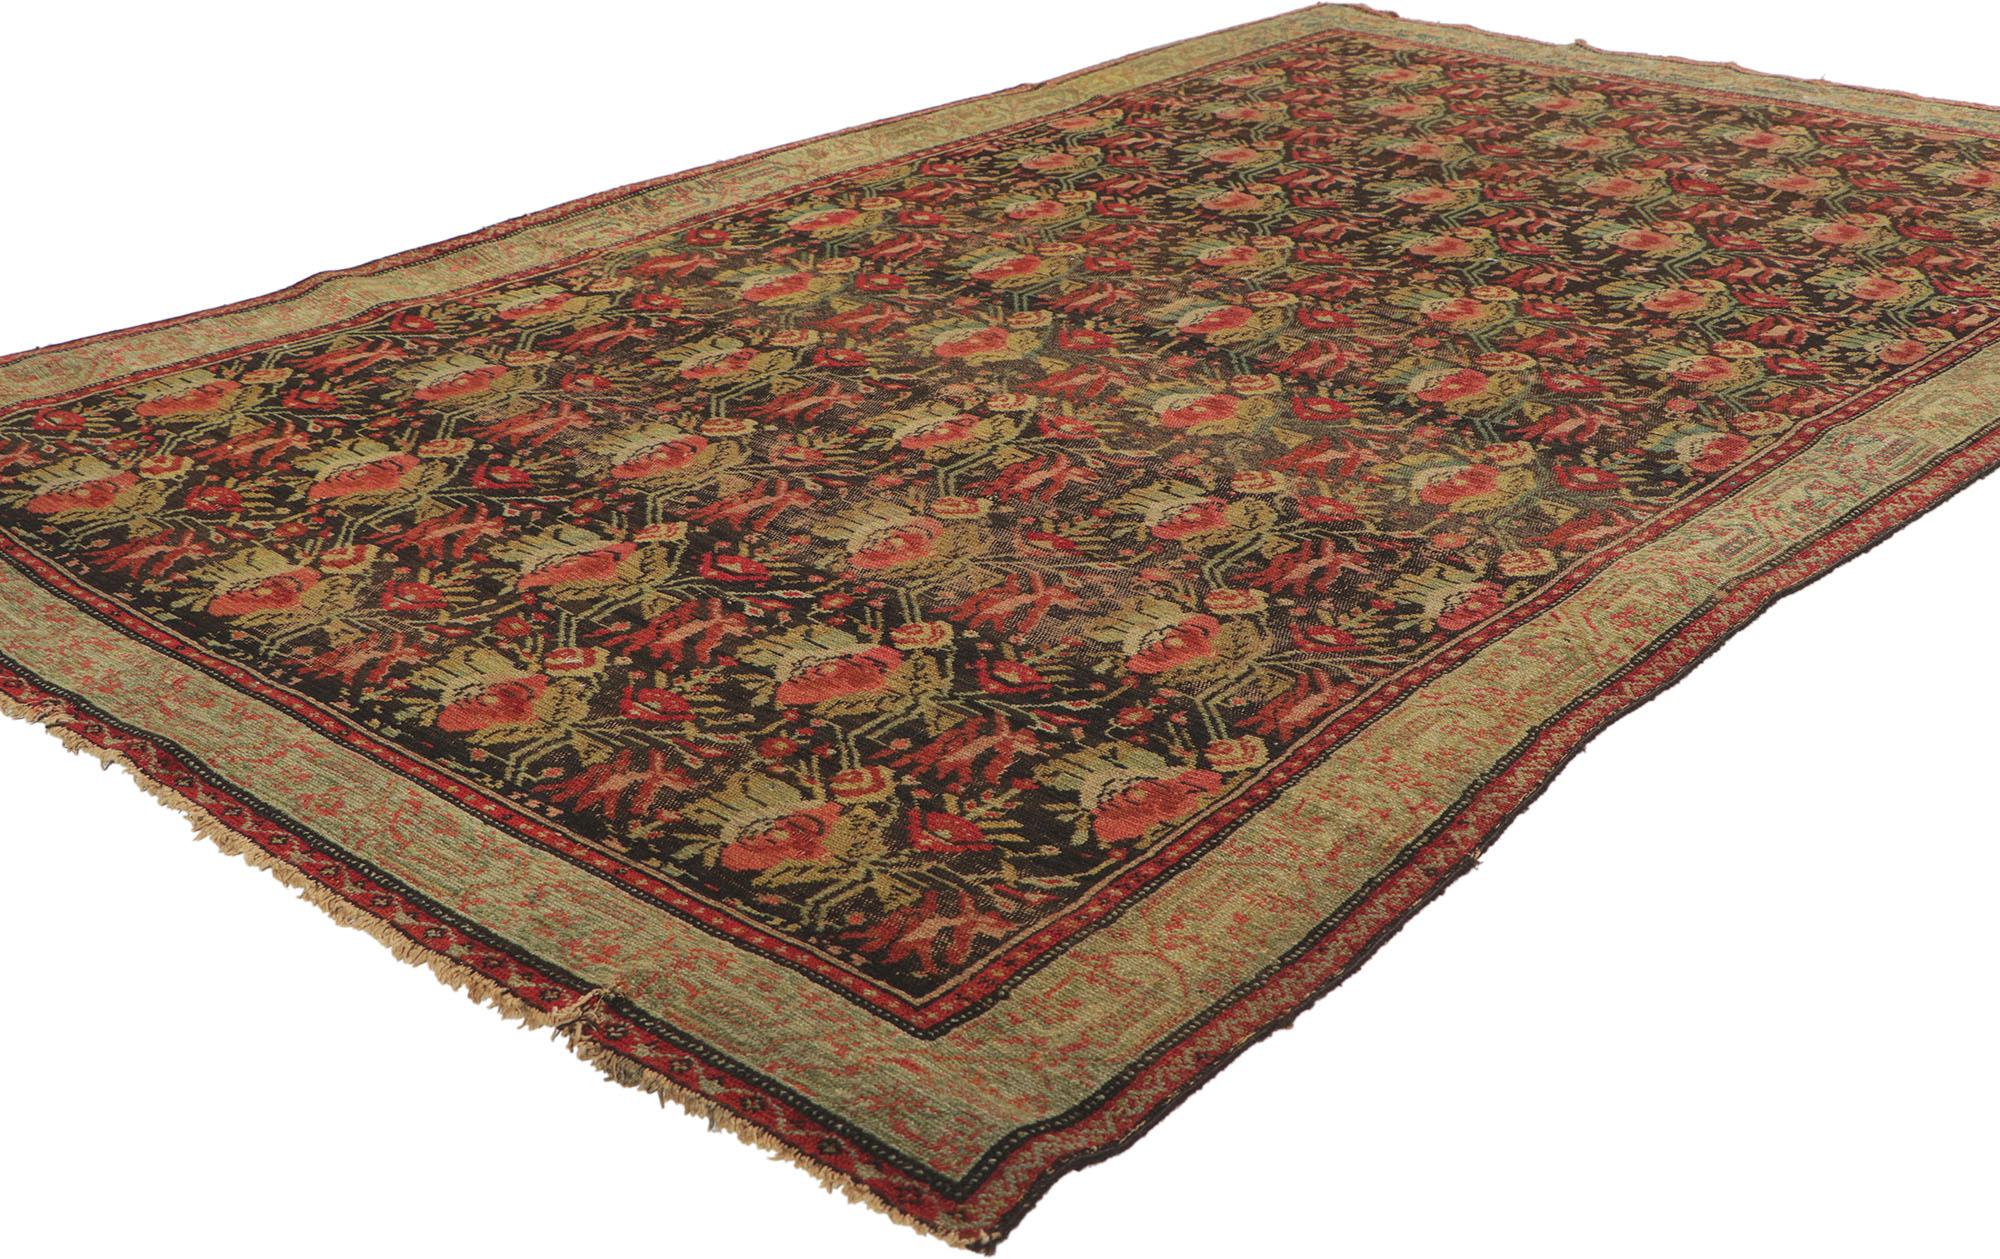 76955 Vintage Persian Senneh Rug with American Colonial Style 03'11 x 06'04. Displaying well-balanced symmetry and a simple design aesthetic, this hand knotted wool vintage Persian Senneh rug beautifully embodies American Colonial style with rustic